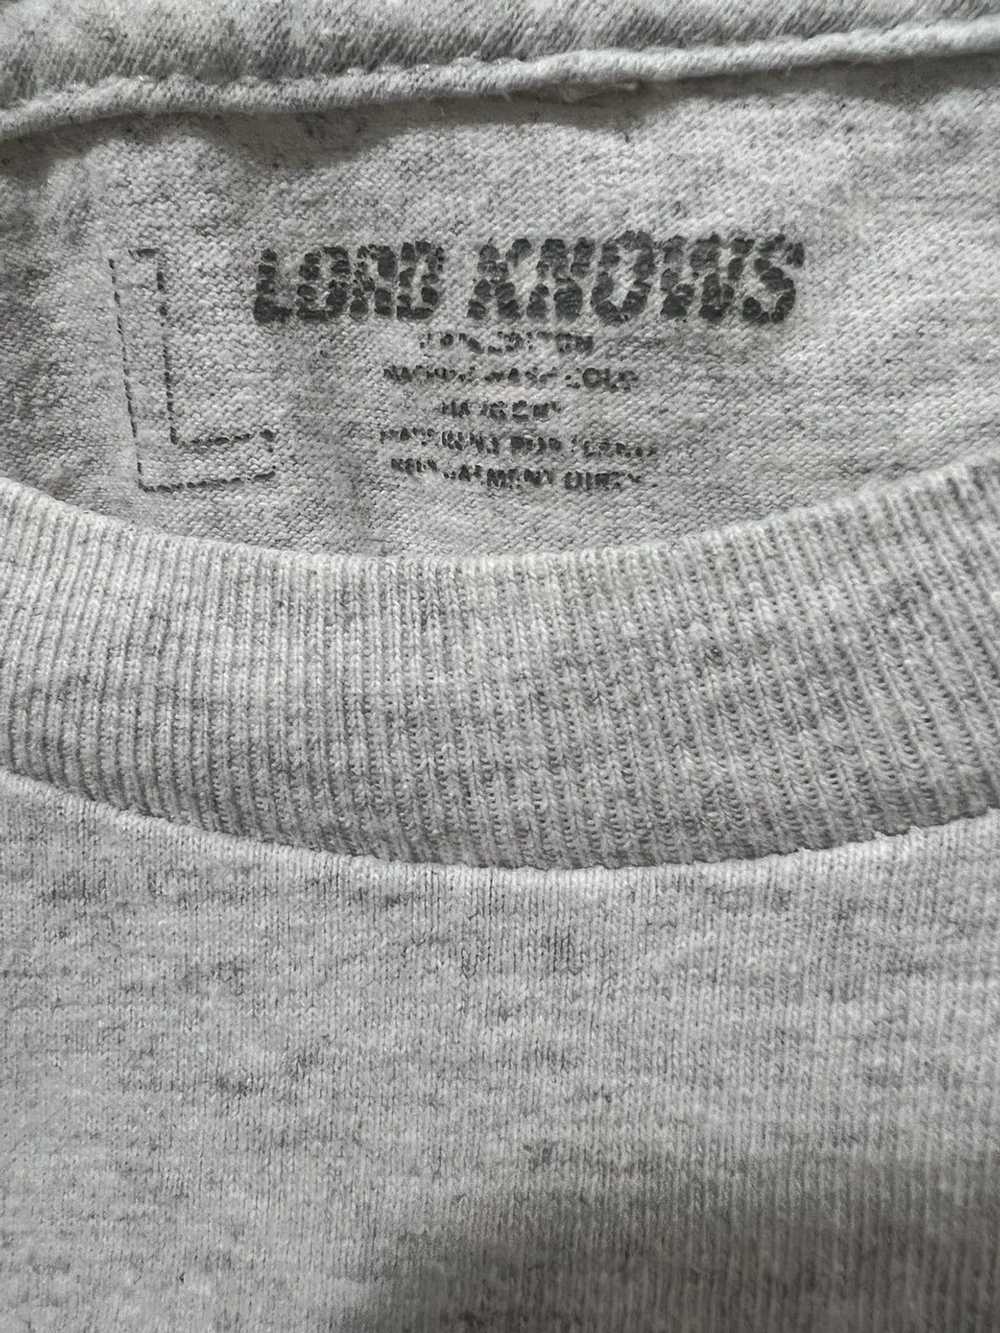 Lxrdknows Lord Knows 5 Year Anniversary Shirt - image 3